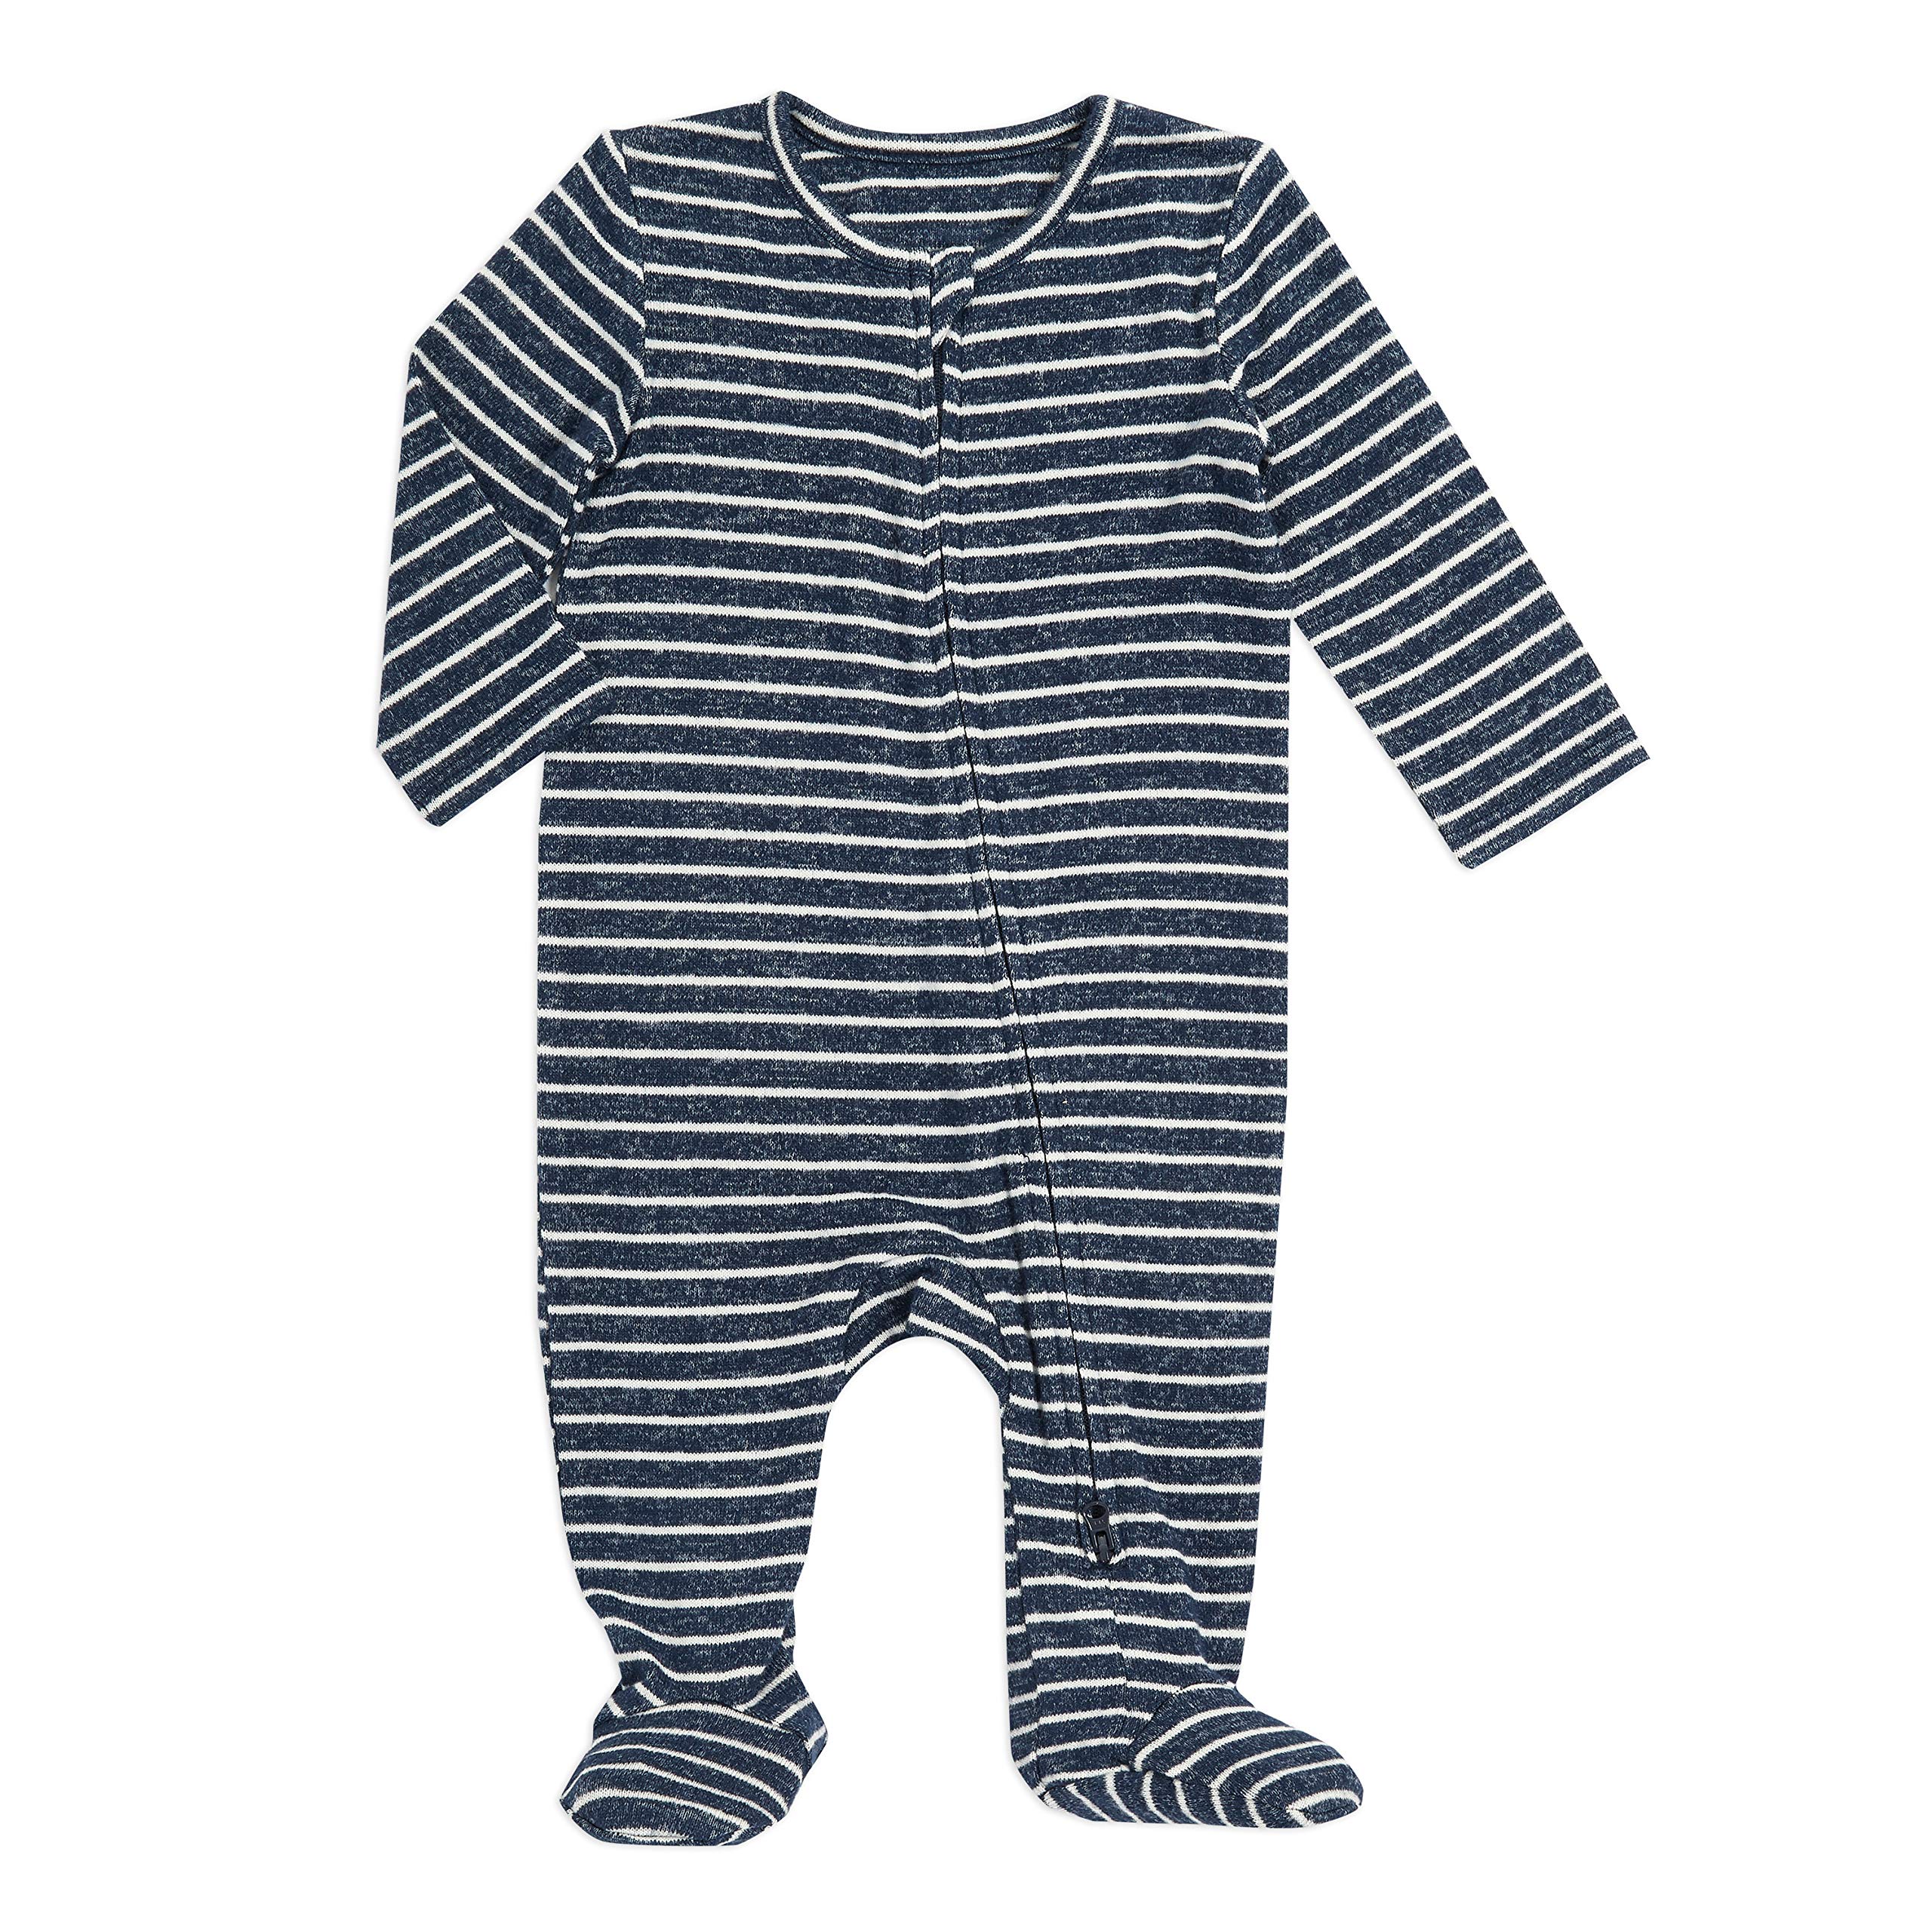 aden + anais Gift Set Bundle - Play and Discover Baby Activity Gym - Snuggle Knit Baby Boy Long Sleeve Zipper, Navy Stripe, 0-3M